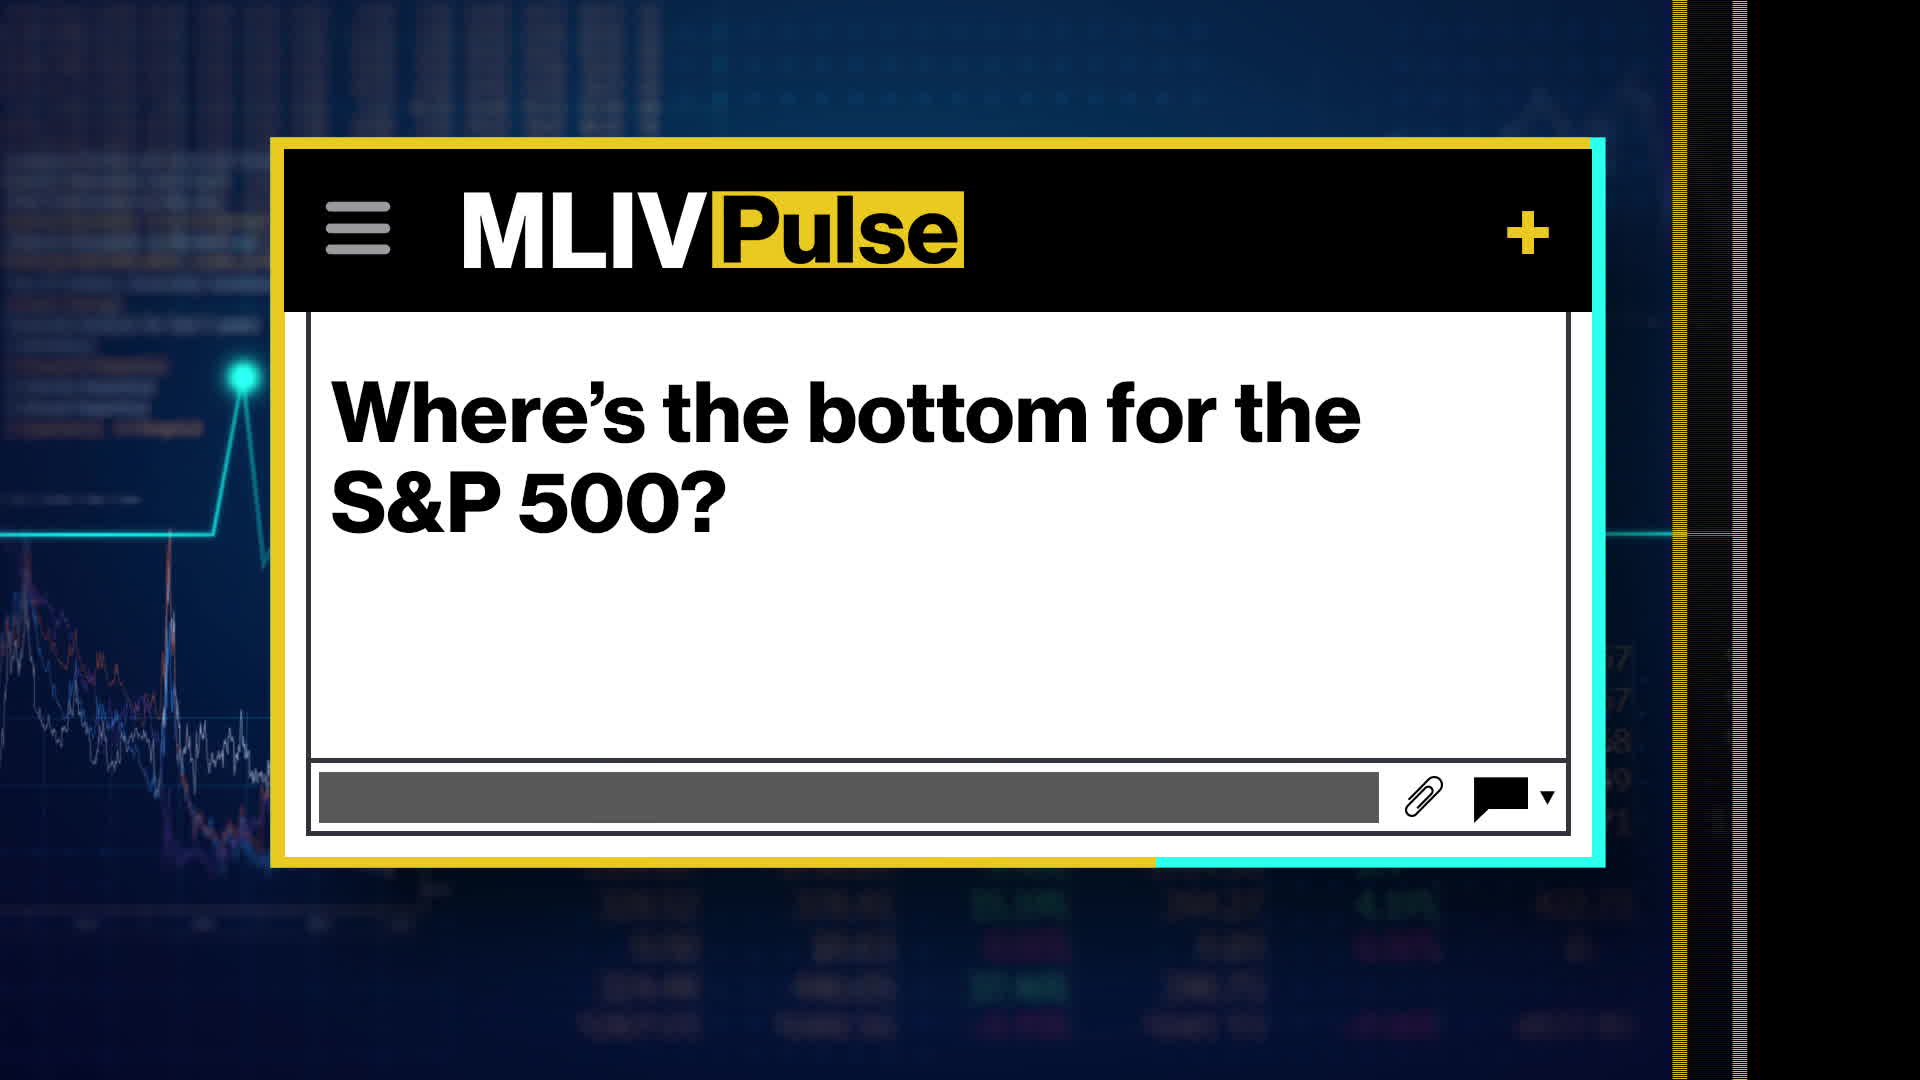 MLIV Pulse: Where's the Bottom for the S&P 500?